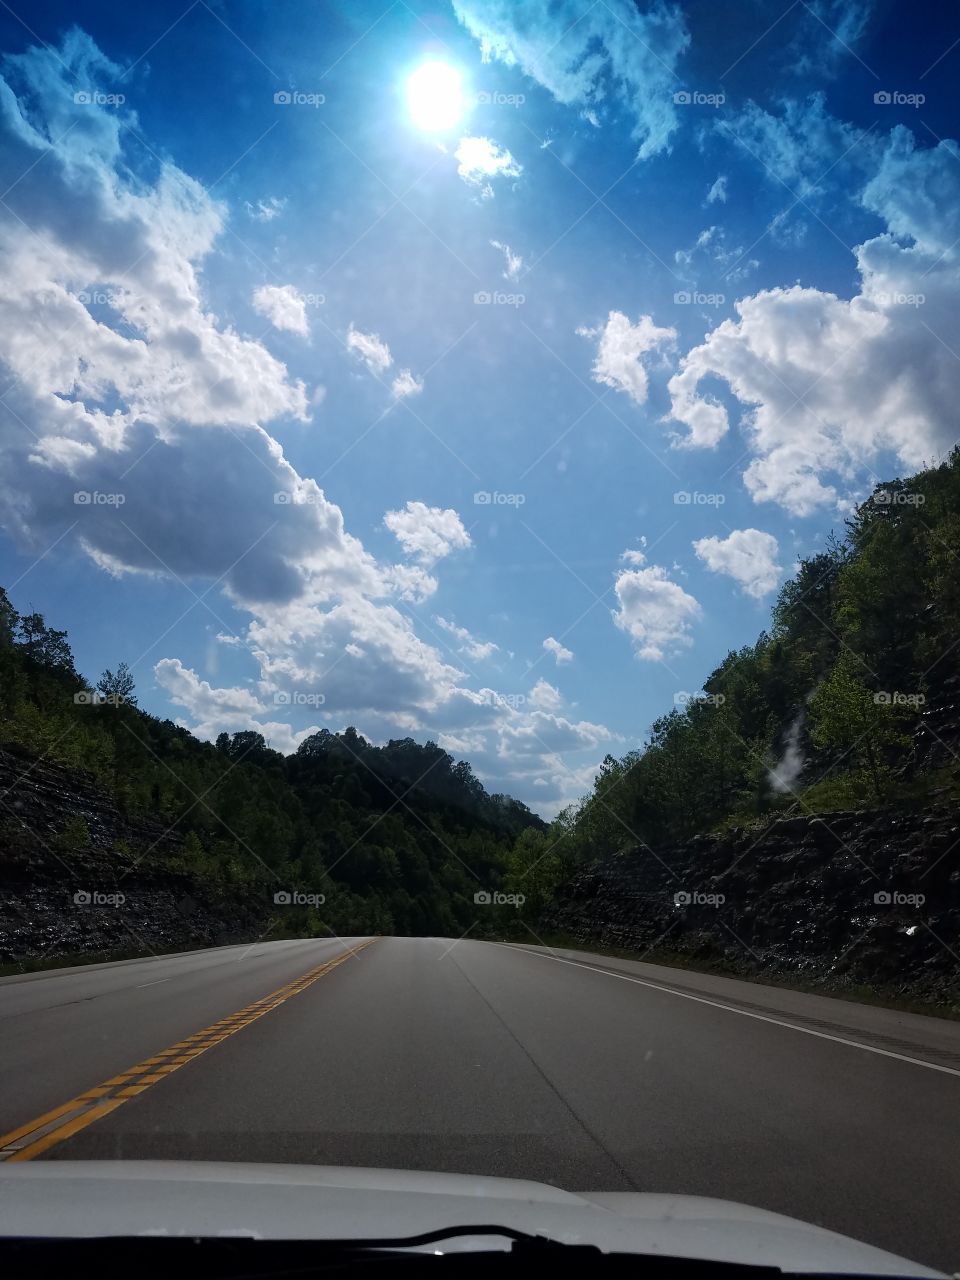 Brighty Cloudy Blue Sky Above Low Hills and Open Road